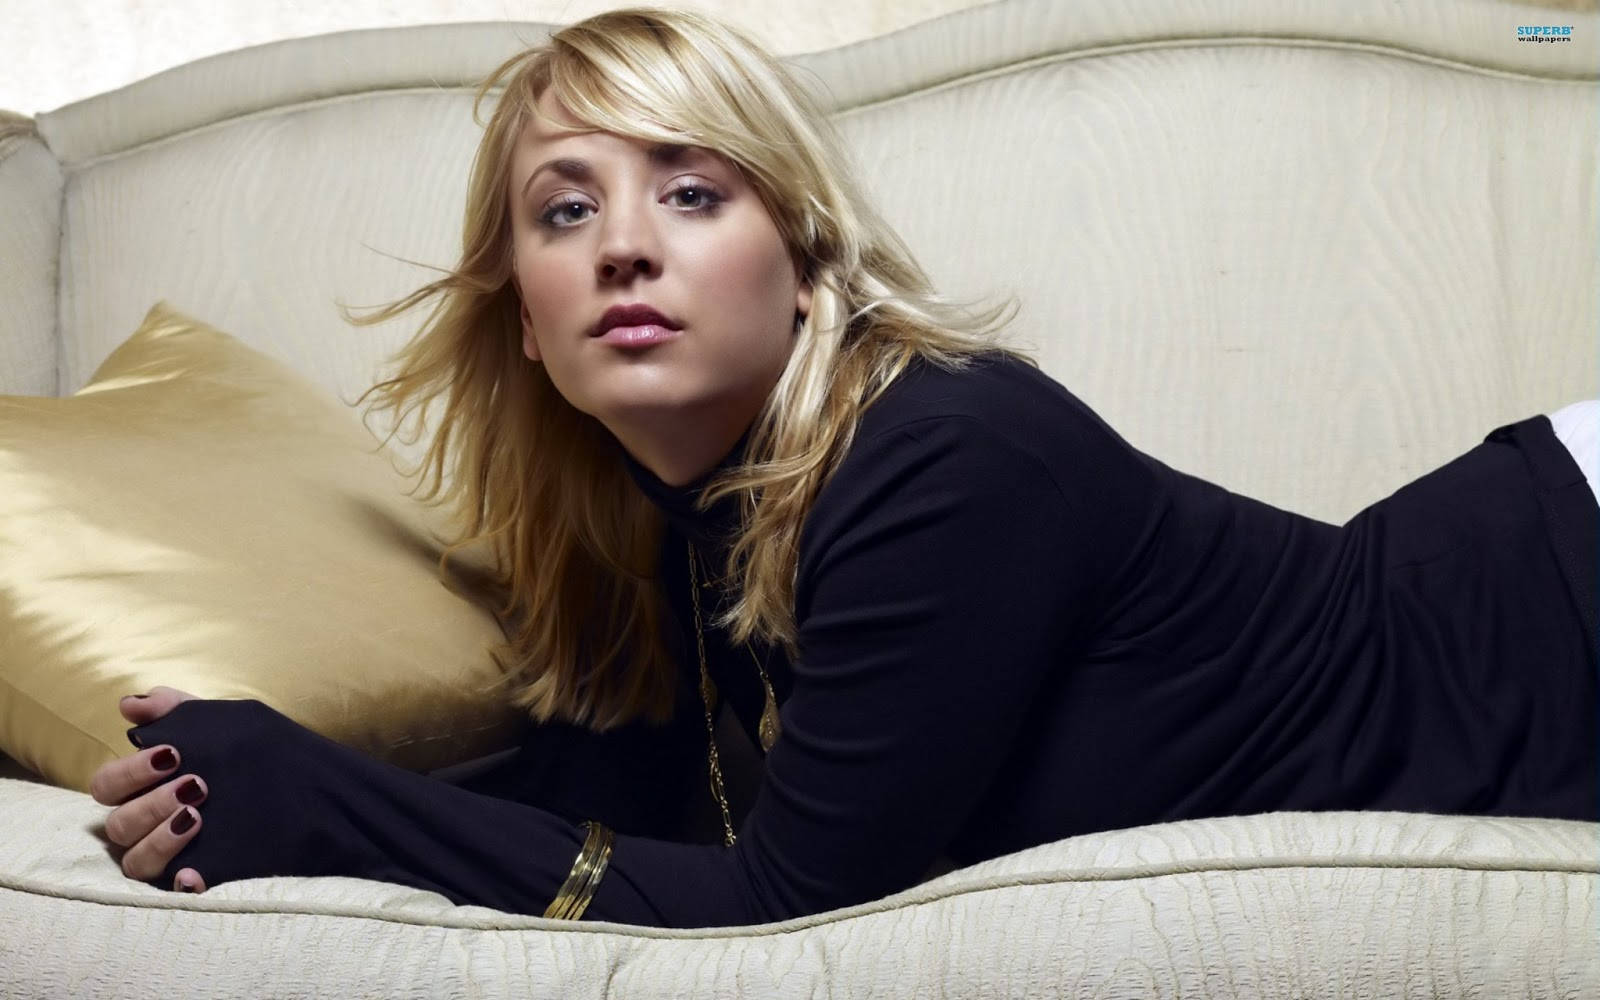 Blonde Kaley Cuoco On Couch